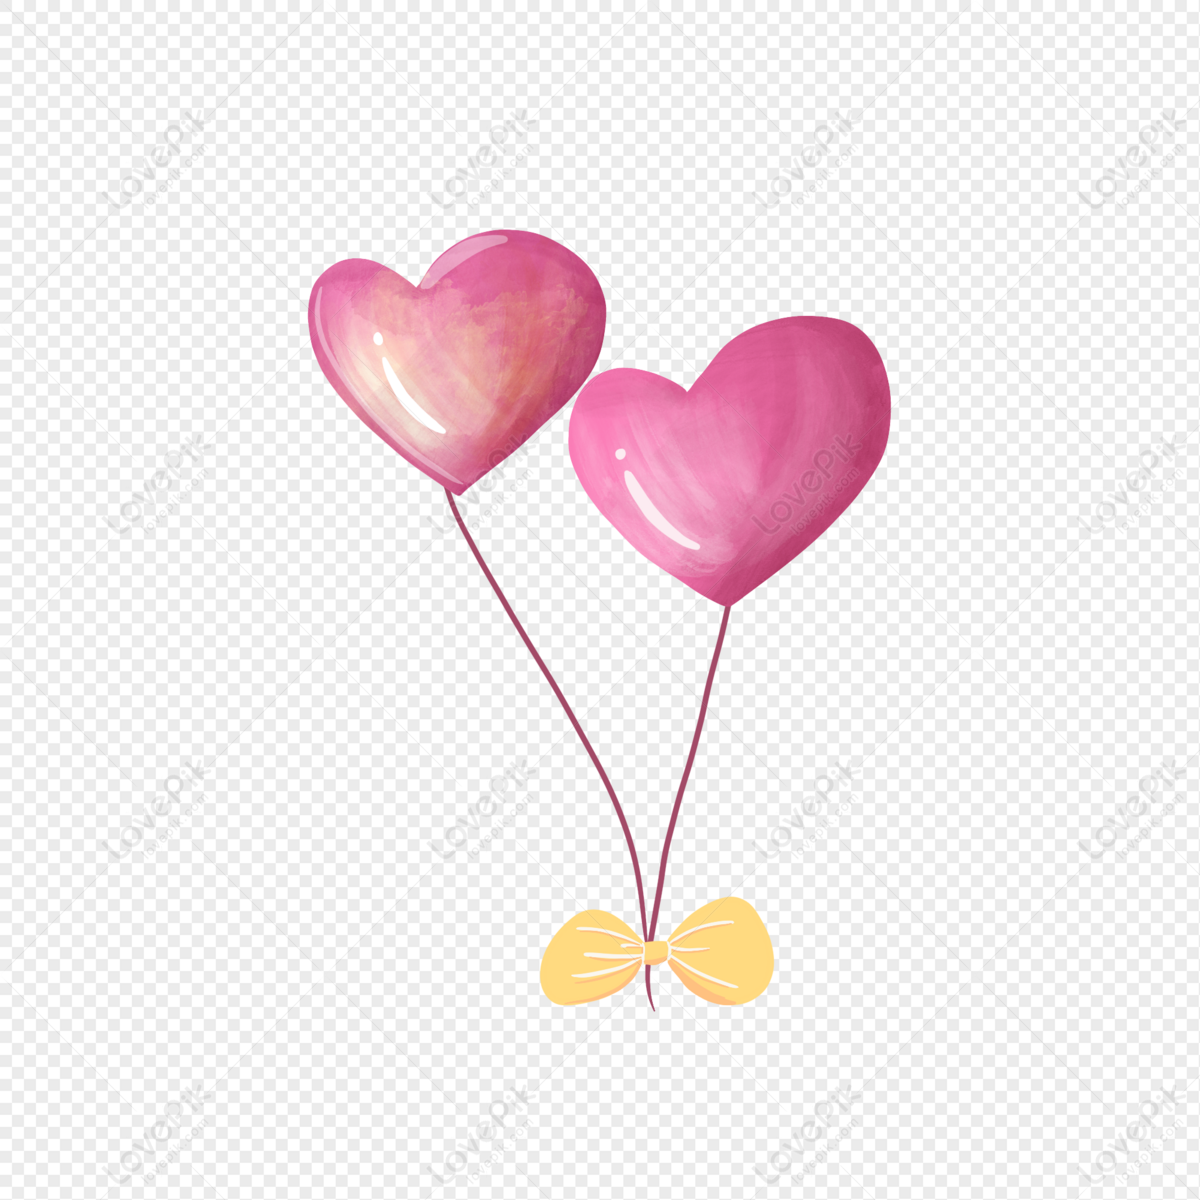 Cartoon Heart Balloon Illustration PNG Transparent Background And Clipart  Image For Free Download - Lovepik | 401277350